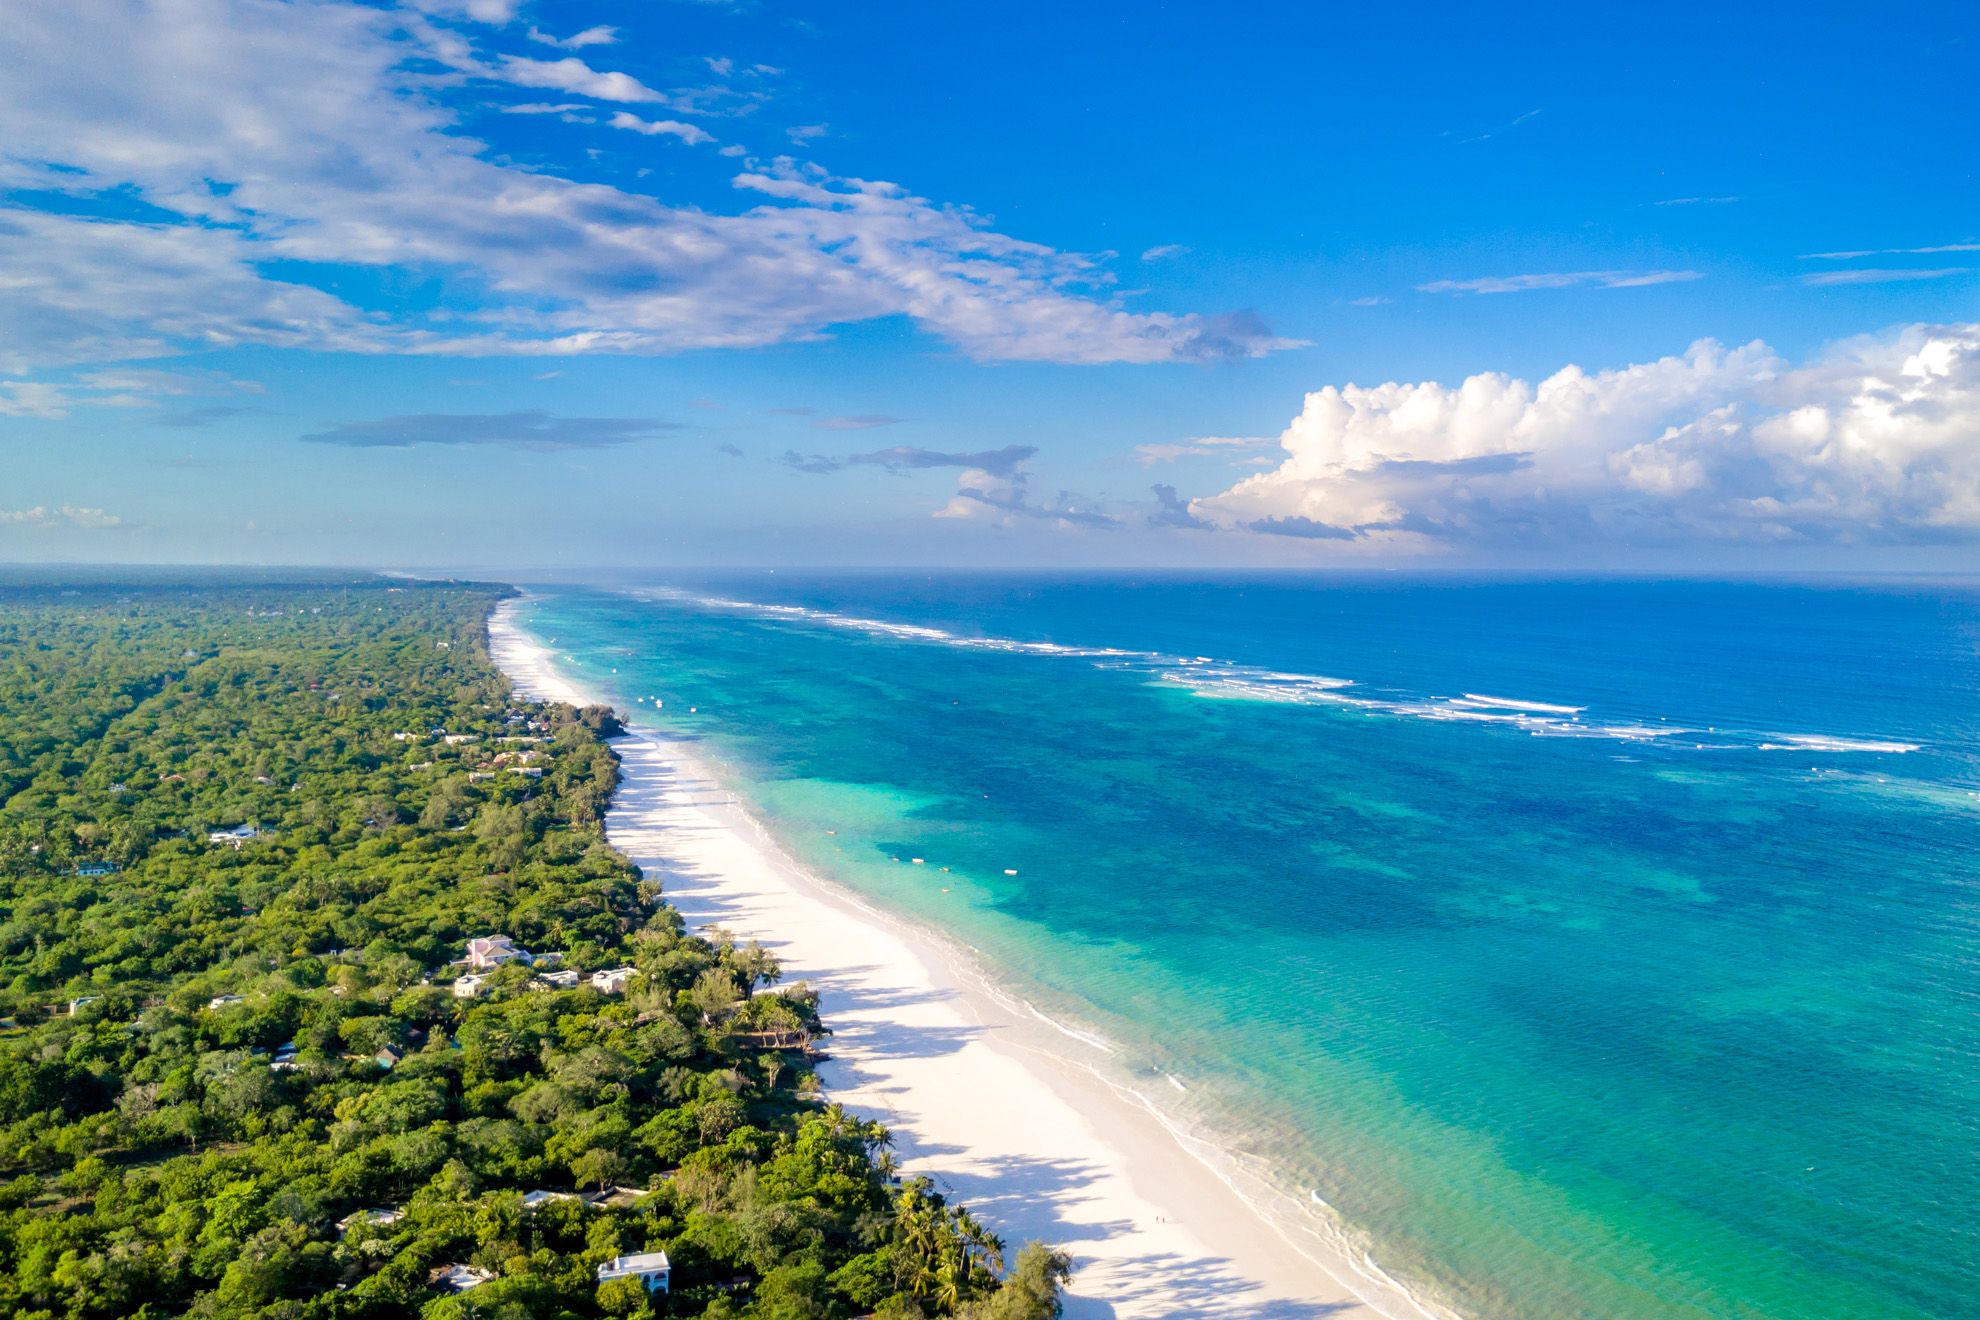 Sceneries at the Diani Beach